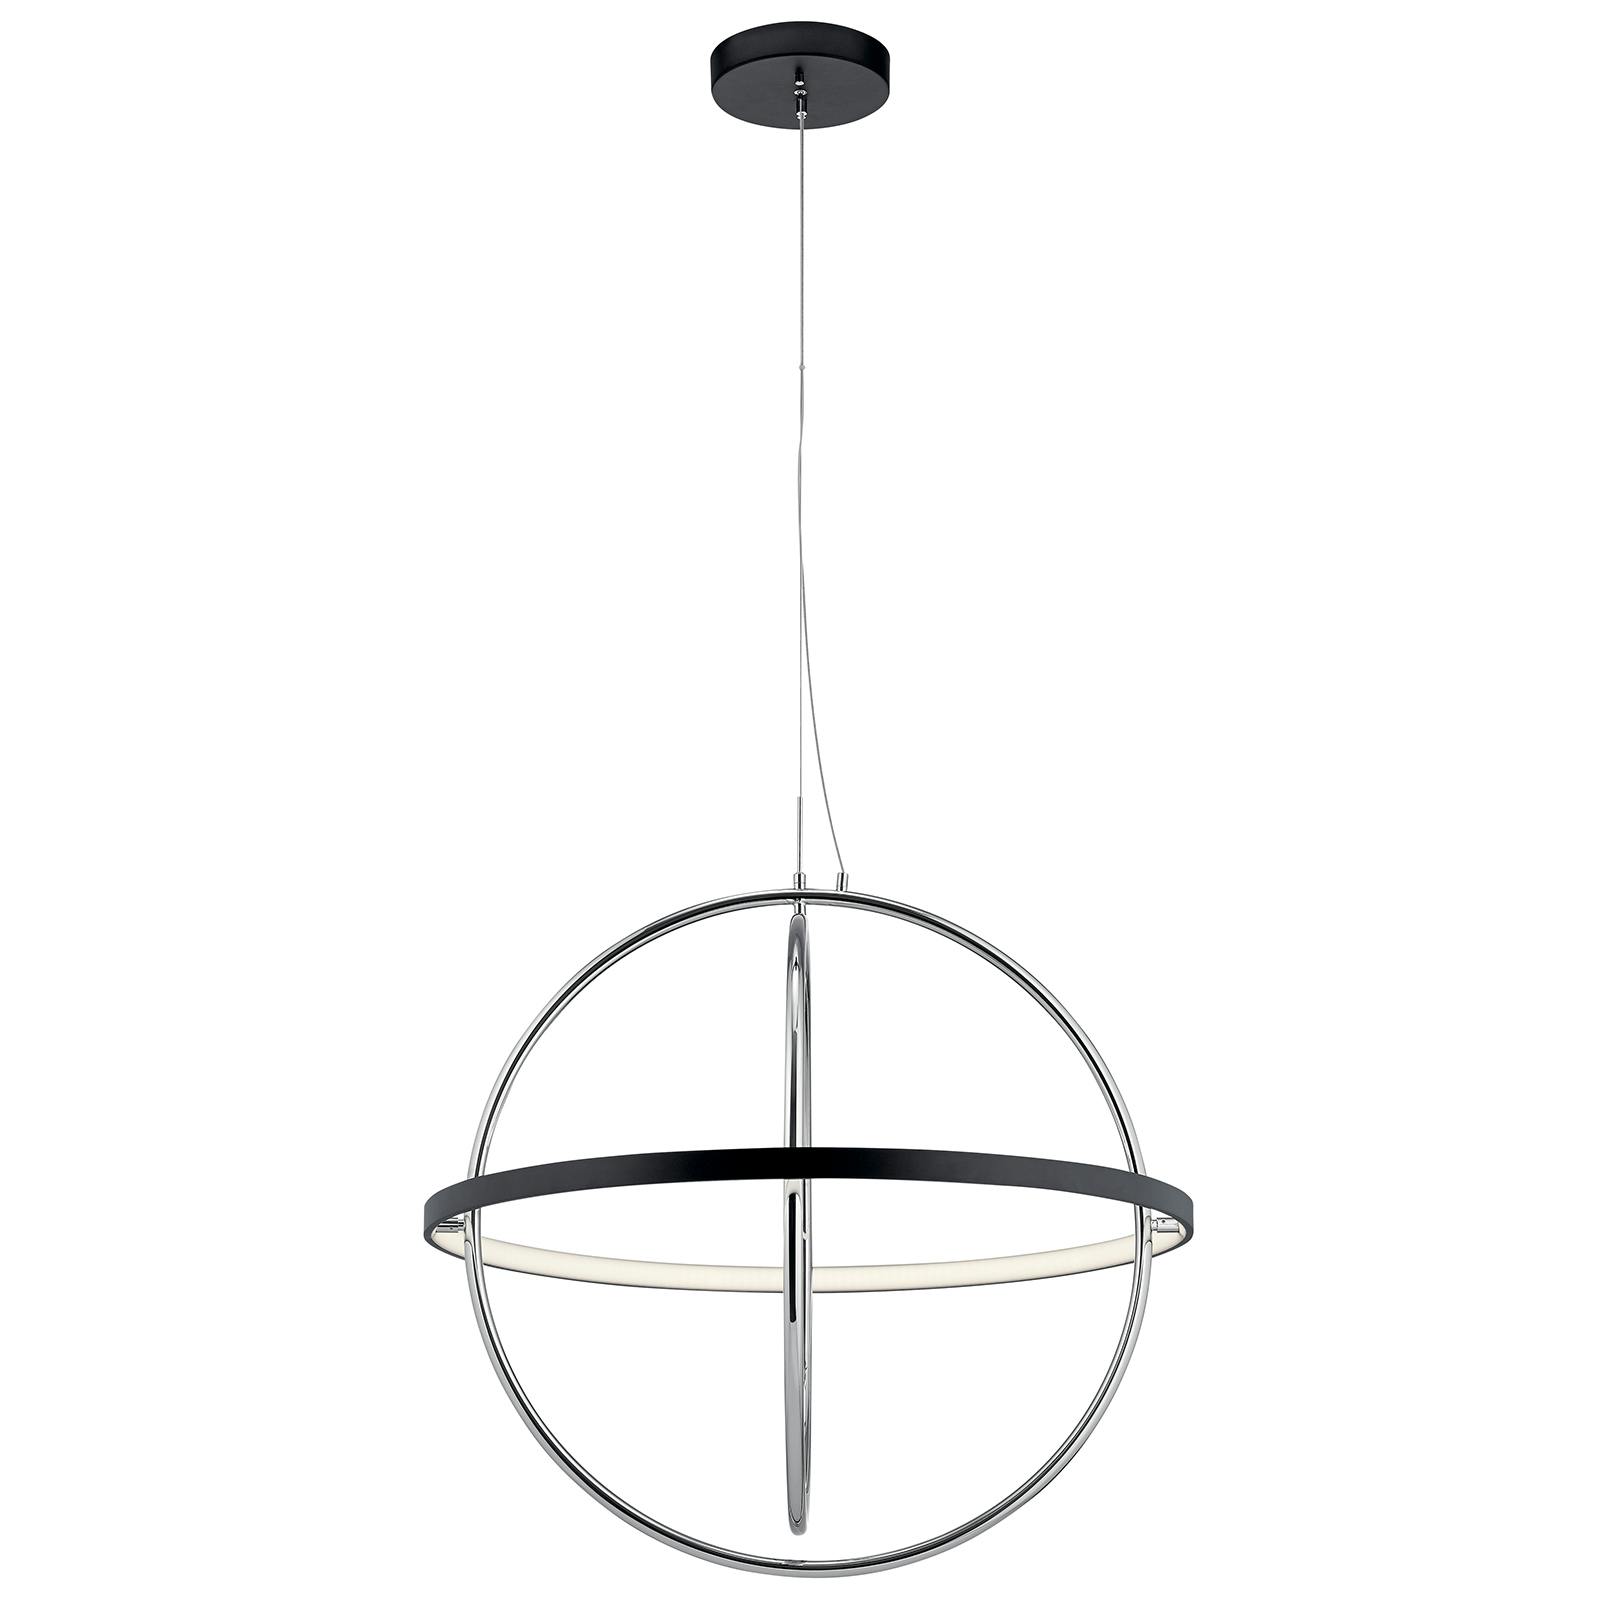 Profile view of the Arvo™ Large Orb Chandelier Matte Black on a white background